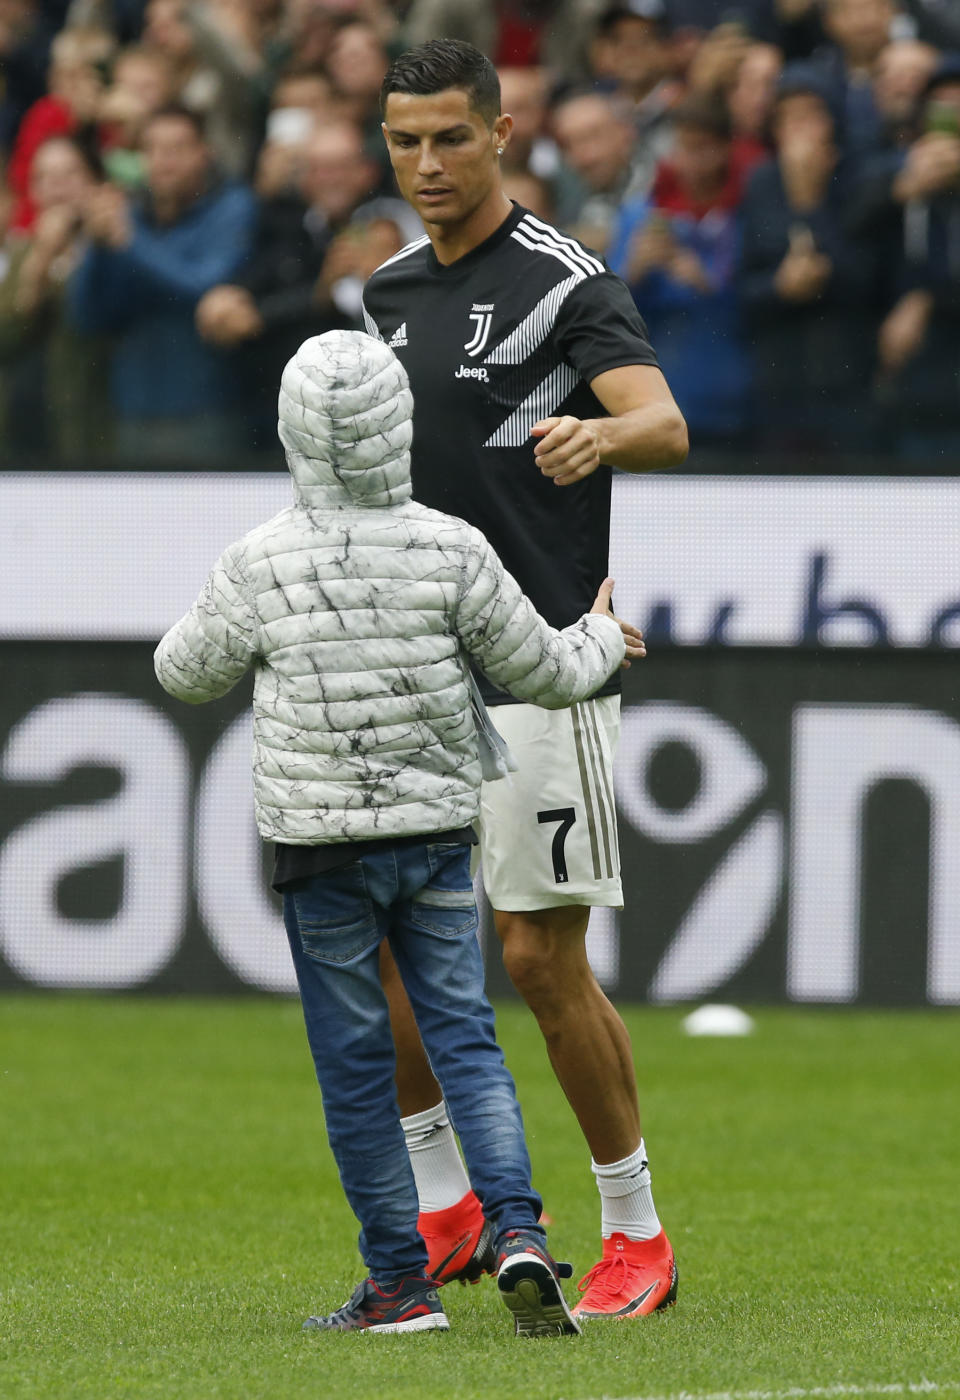 Juventus forward Cristiano Ronaldo talks with a young Juventus fan prior to the Serie A soccer match between Udinese and Juventus, at the Dacia Arena stadium in Udine, Italy, Saturday, Oct.6, 2018. (AP Photo/Antonio Calanni)